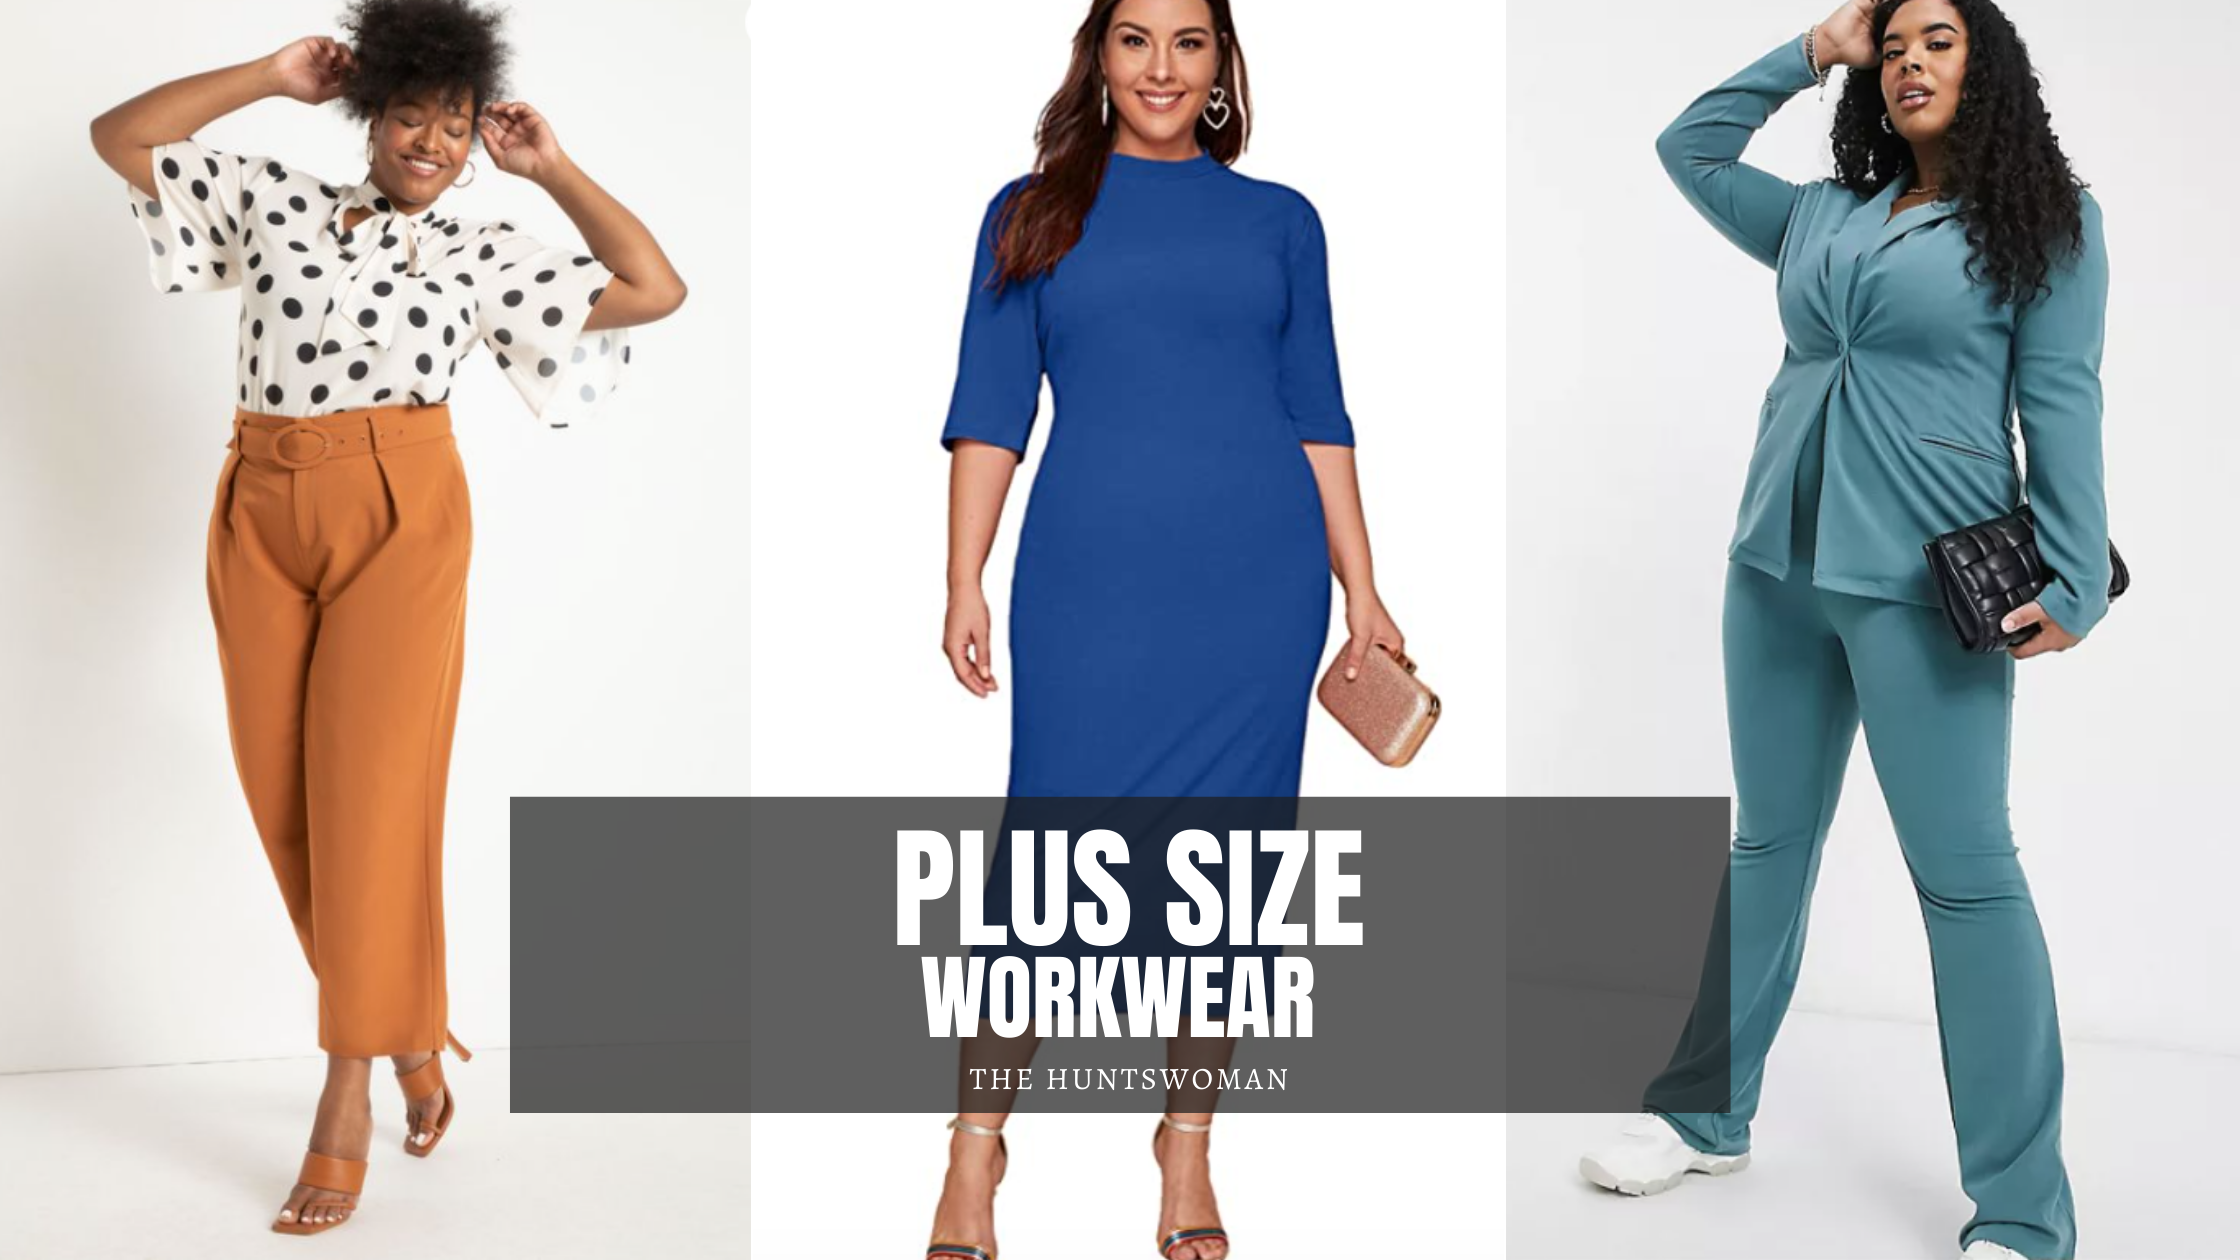 13+ Plus Size Workwear Brands - Where to Shop for Plus Workwear The Huntswoman